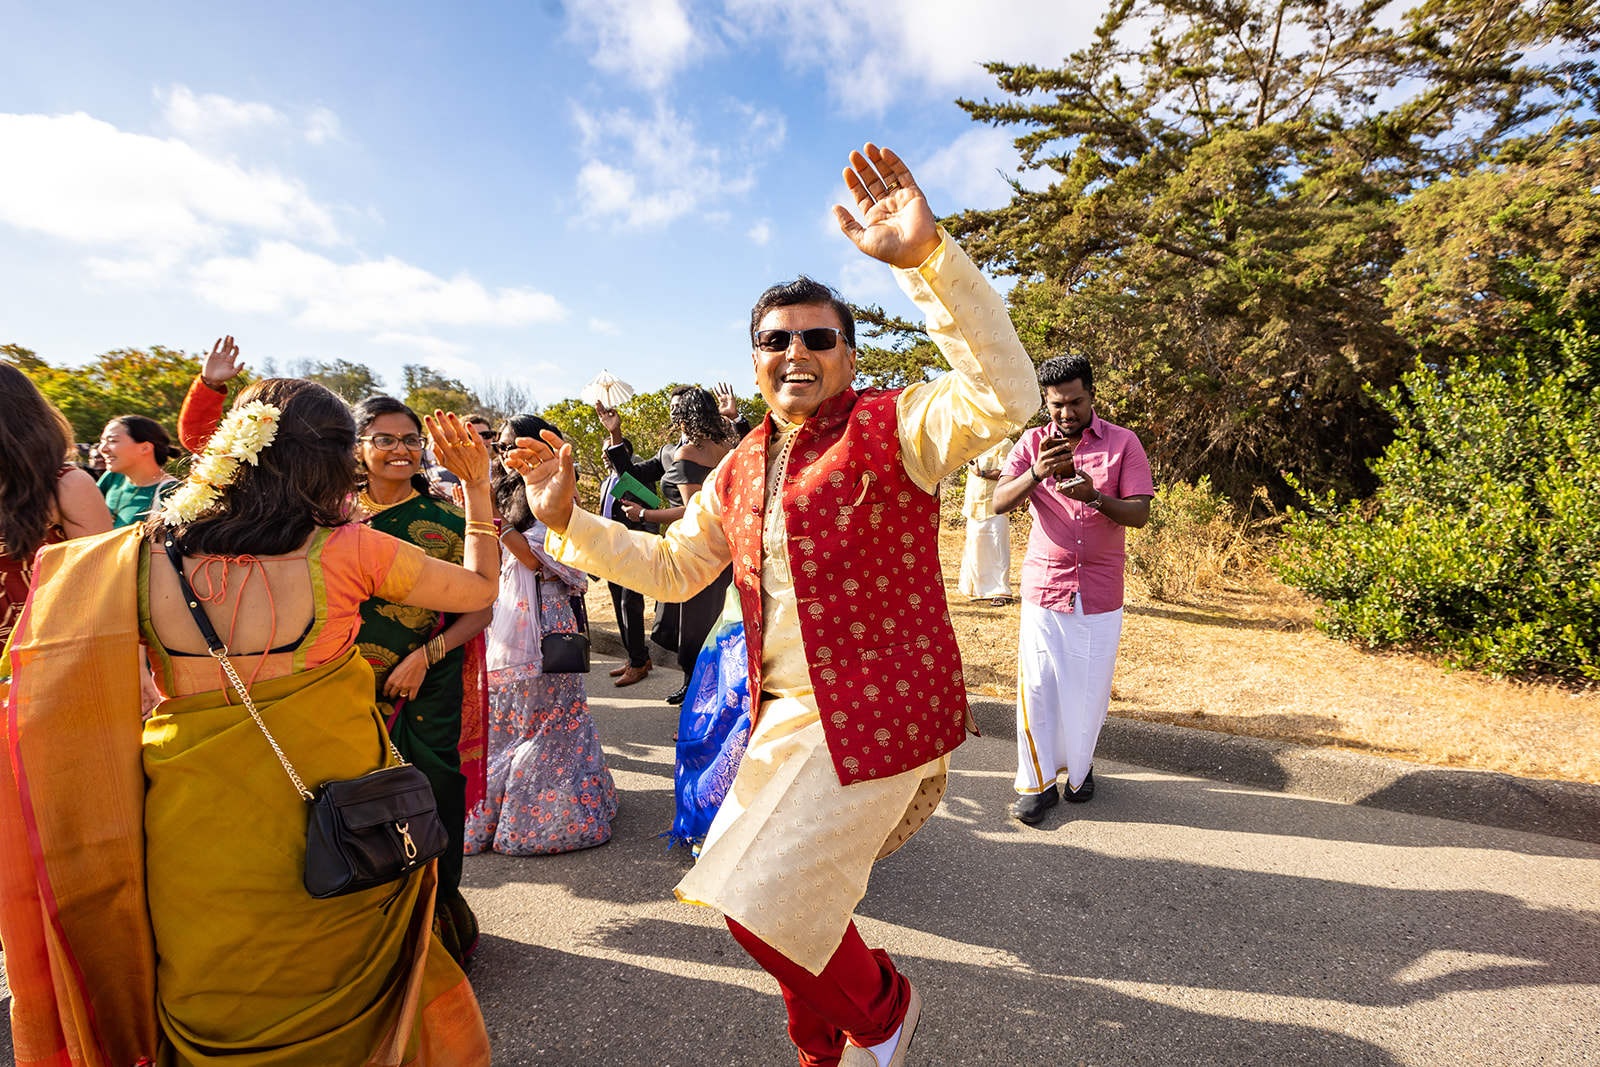 Indian wedding guests celebrate with dances outside during Barat.